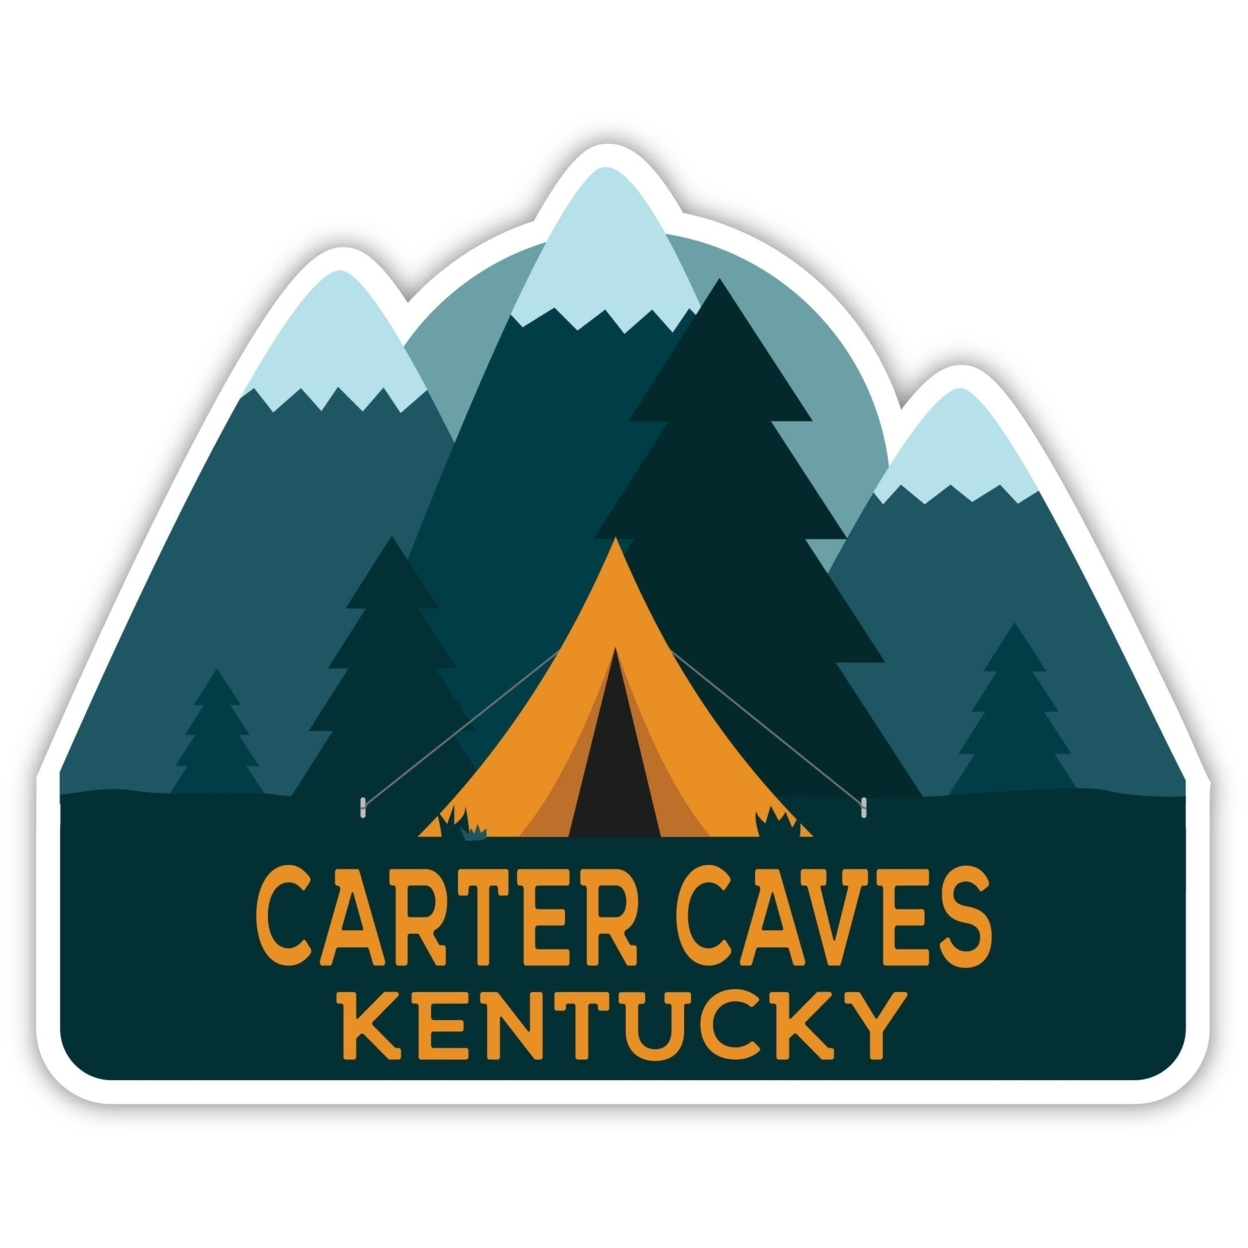 Carter Caves Kentucky Souvenir Decorative Stickers (Choose Theme And Size) - Single Unit, 10-Inch, Tent